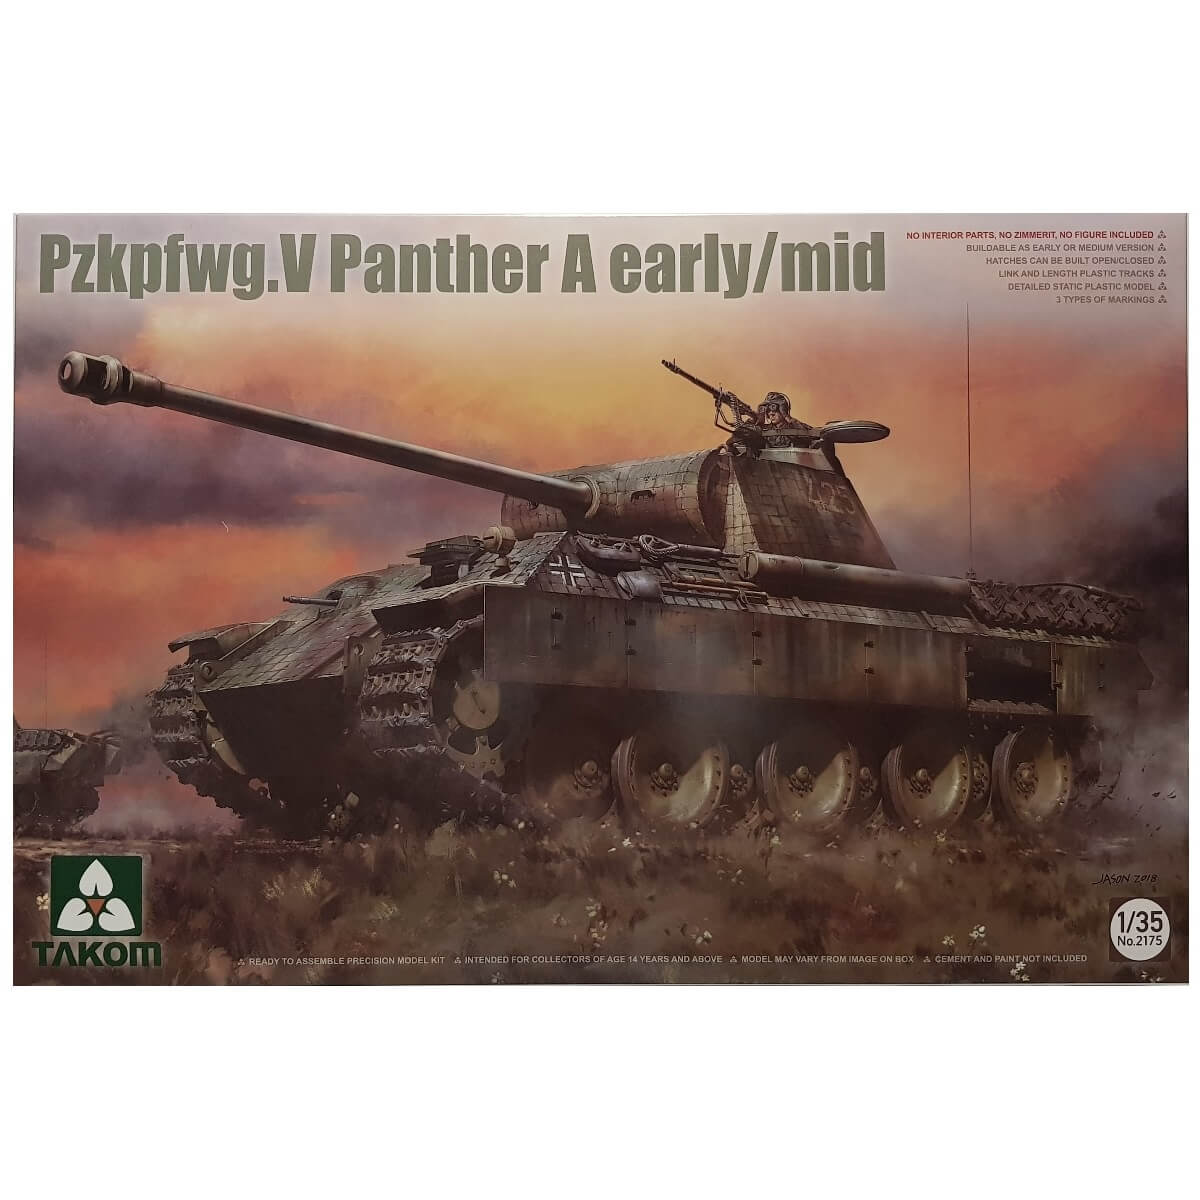 1:35 Pz.Kpfw. V Sd.Kfz. 171 Panther V Ausf. A Mid-Early - TAKOM